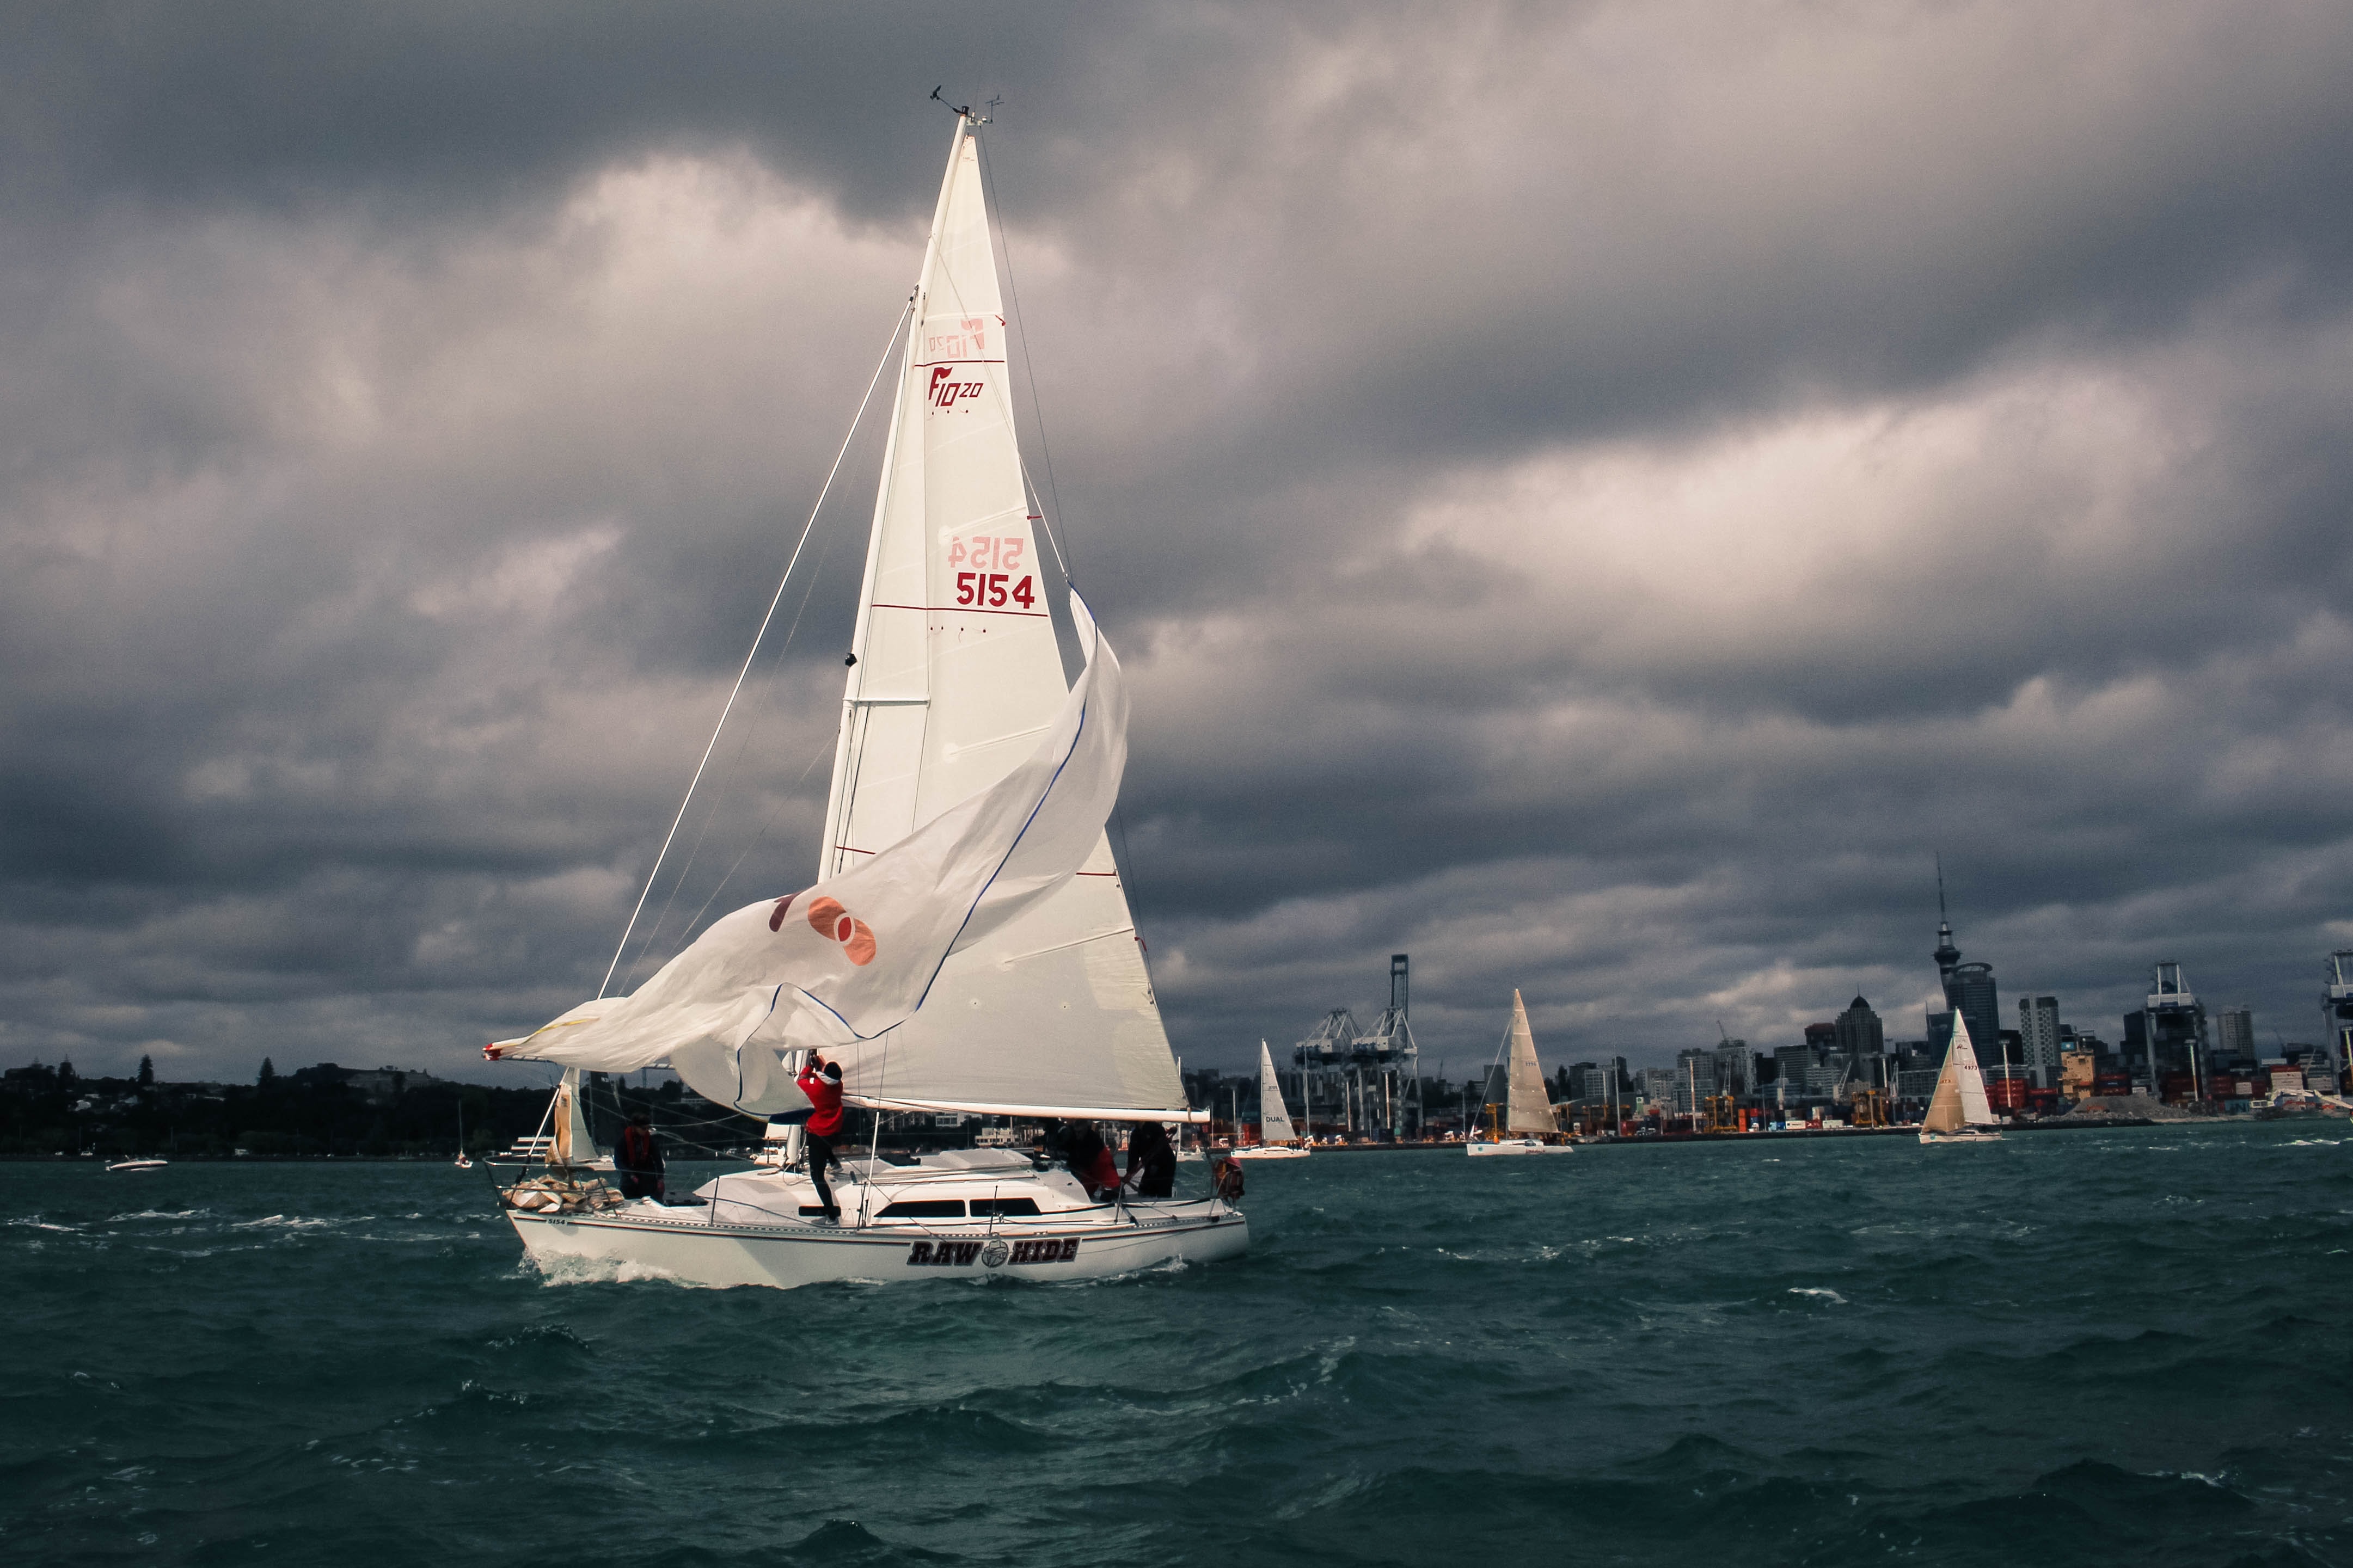 An image of a sailboat on the water on a stormy day.